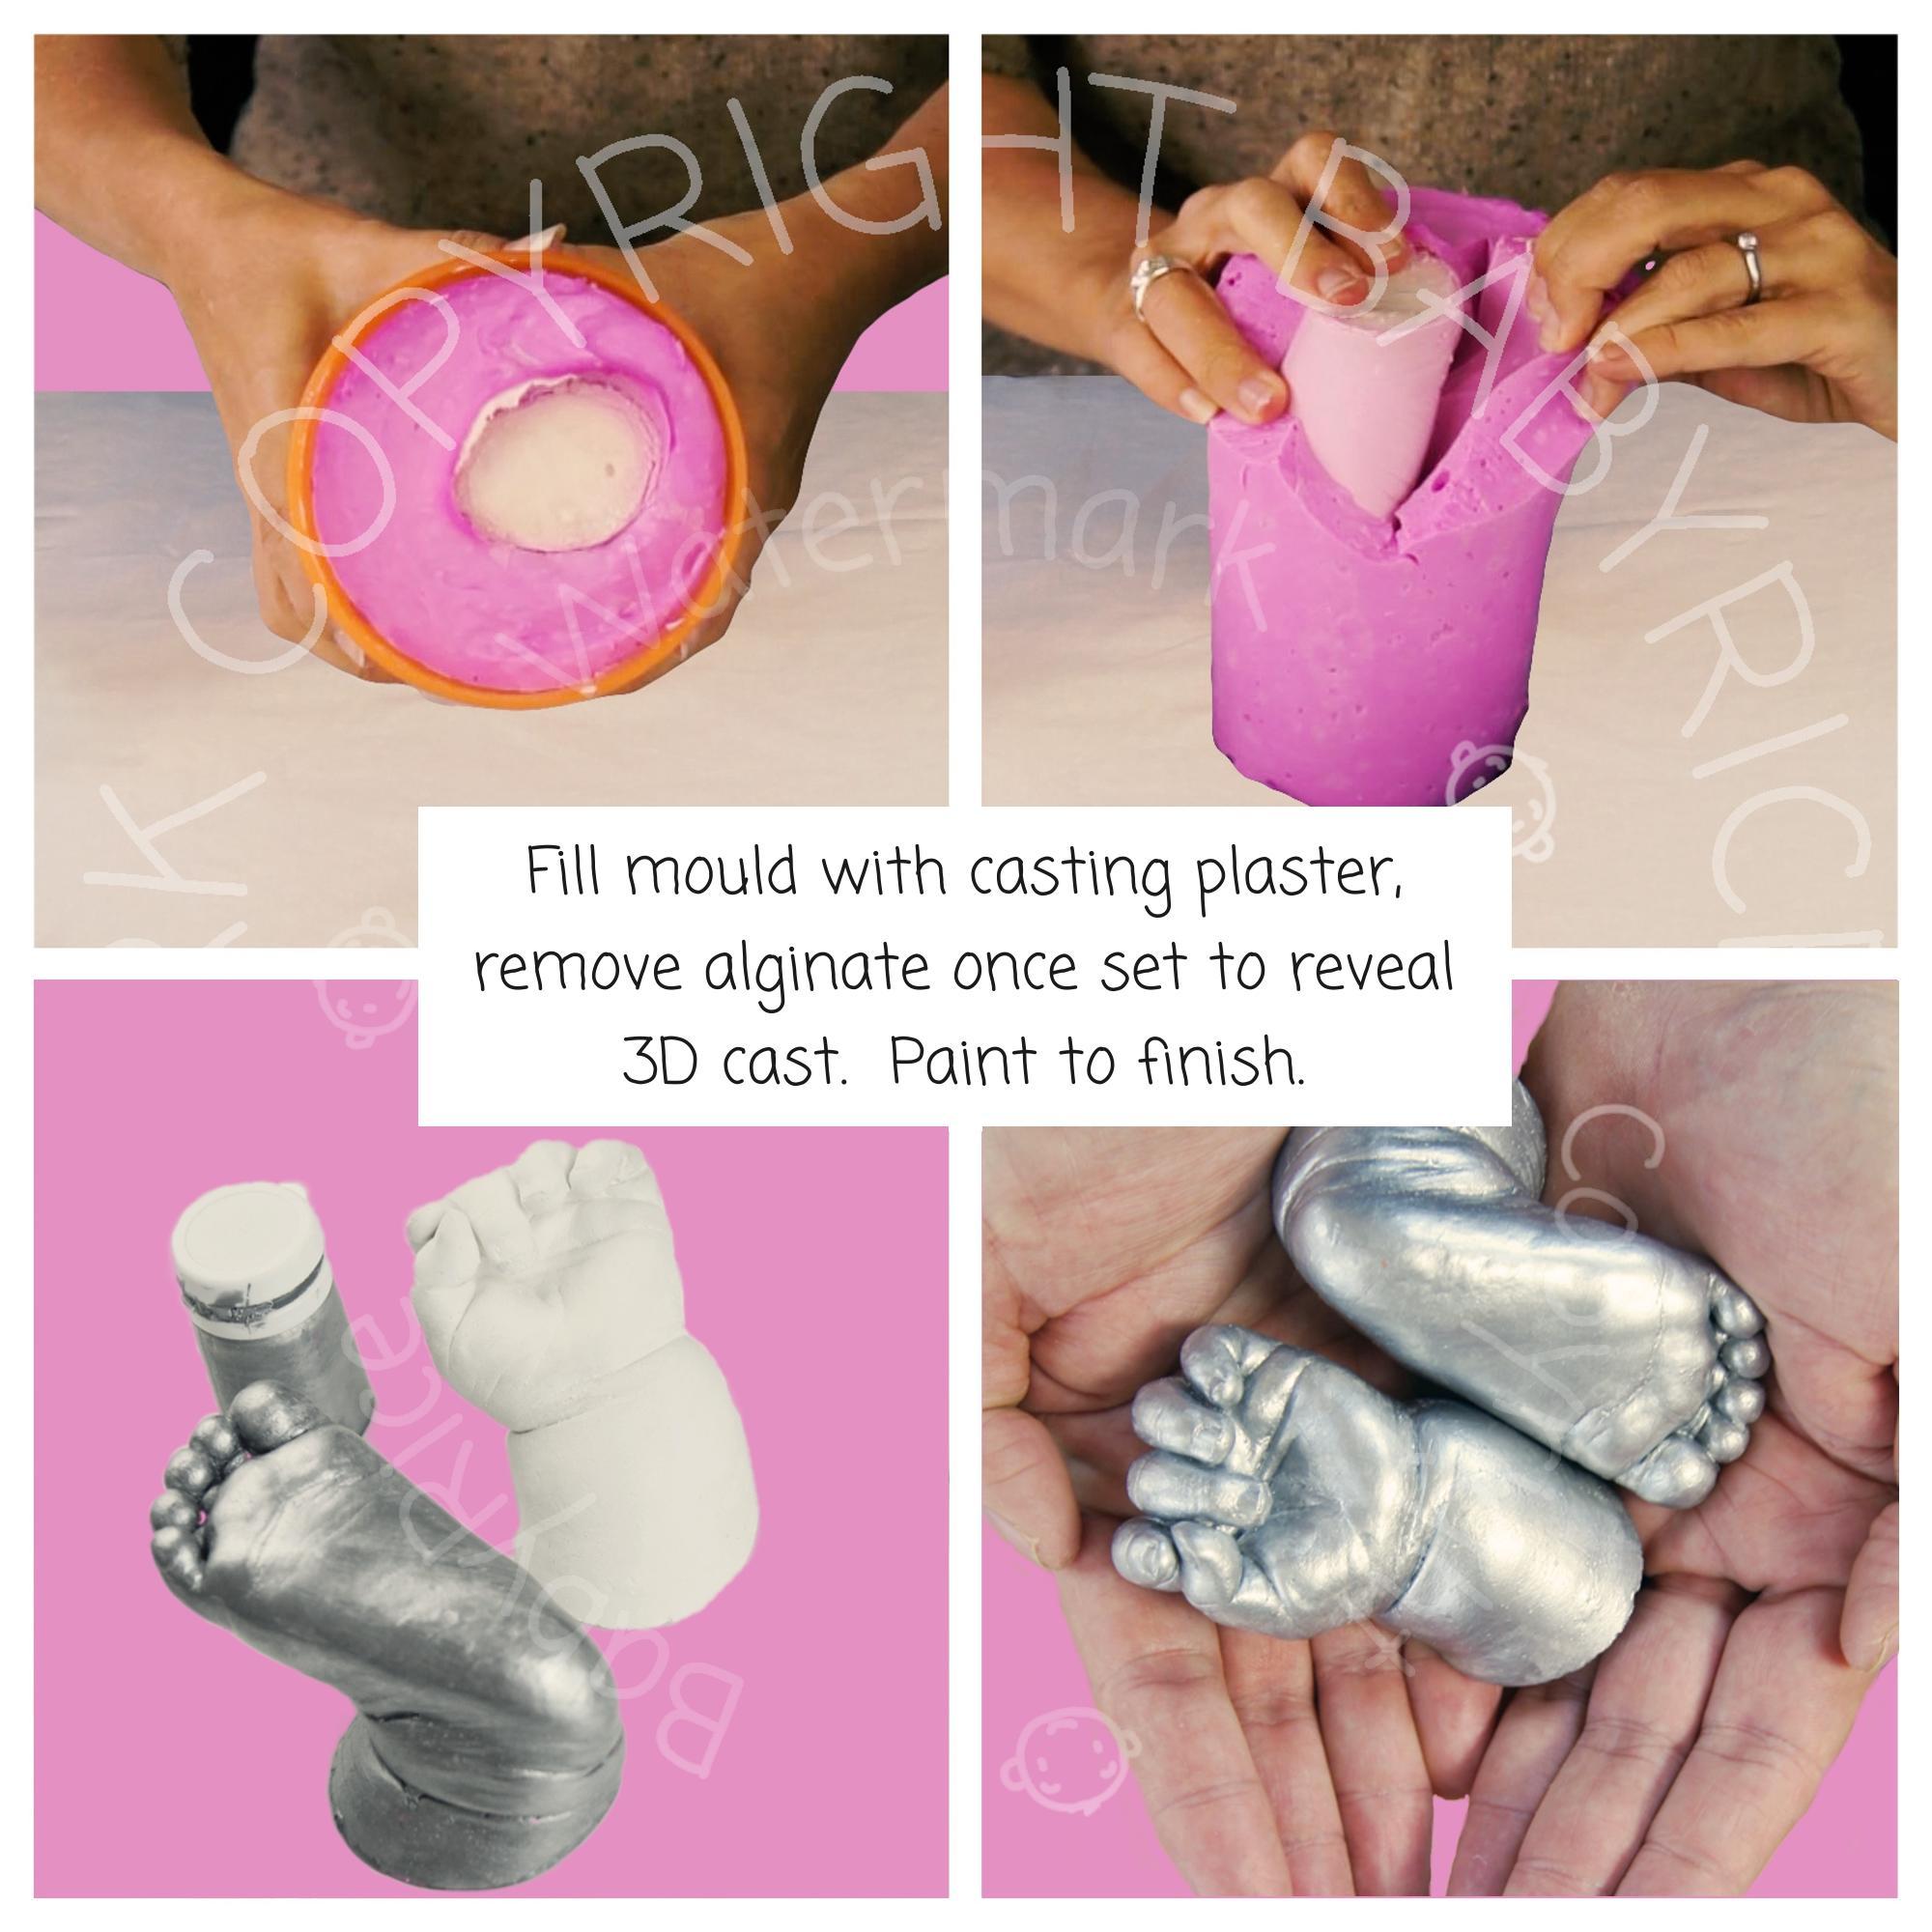 Fill your mould with plaster to make a plaster cast